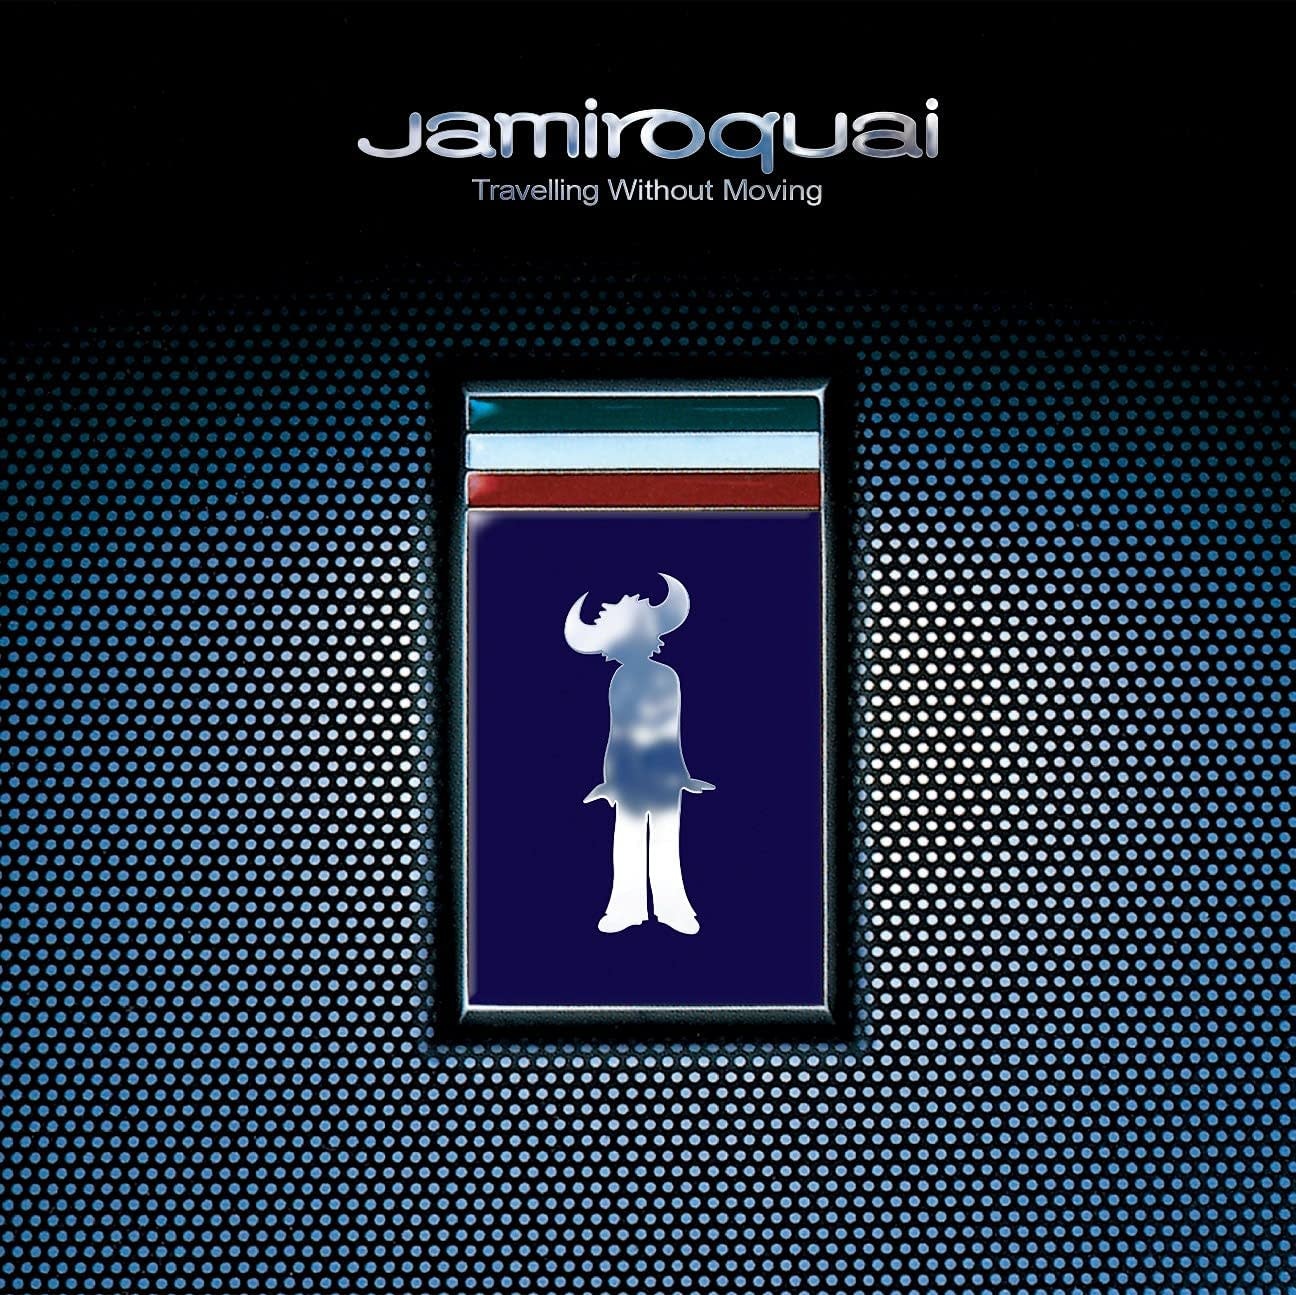 jamiroquai travelling without moving music video